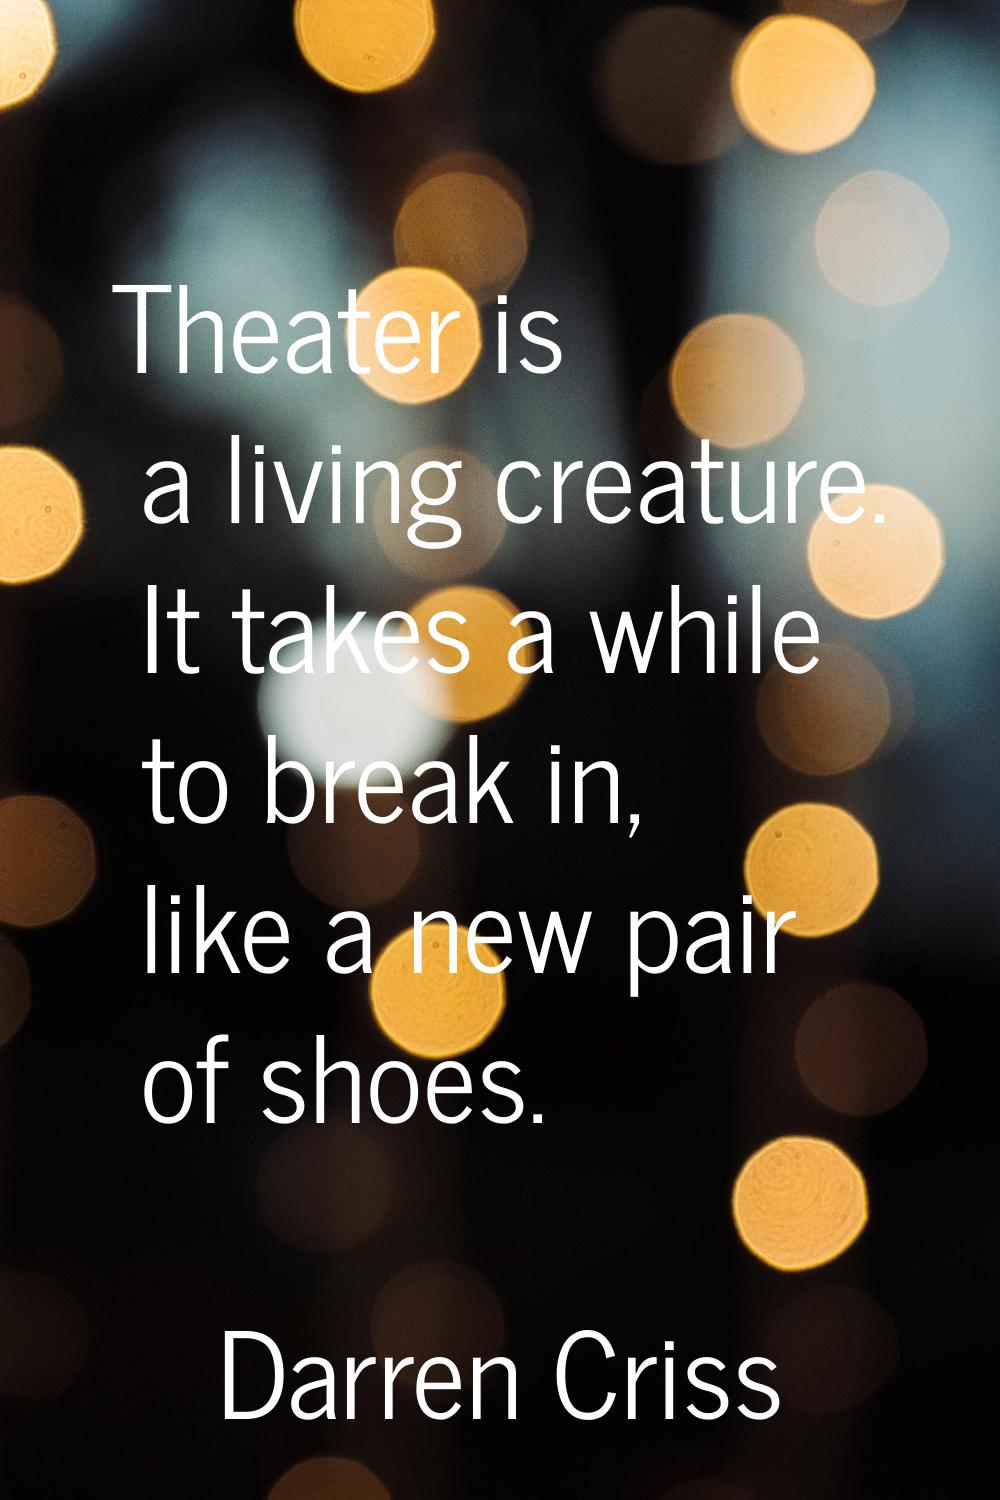 Theater is a living creature. It takes a while to break in, like a new pair of shoes.